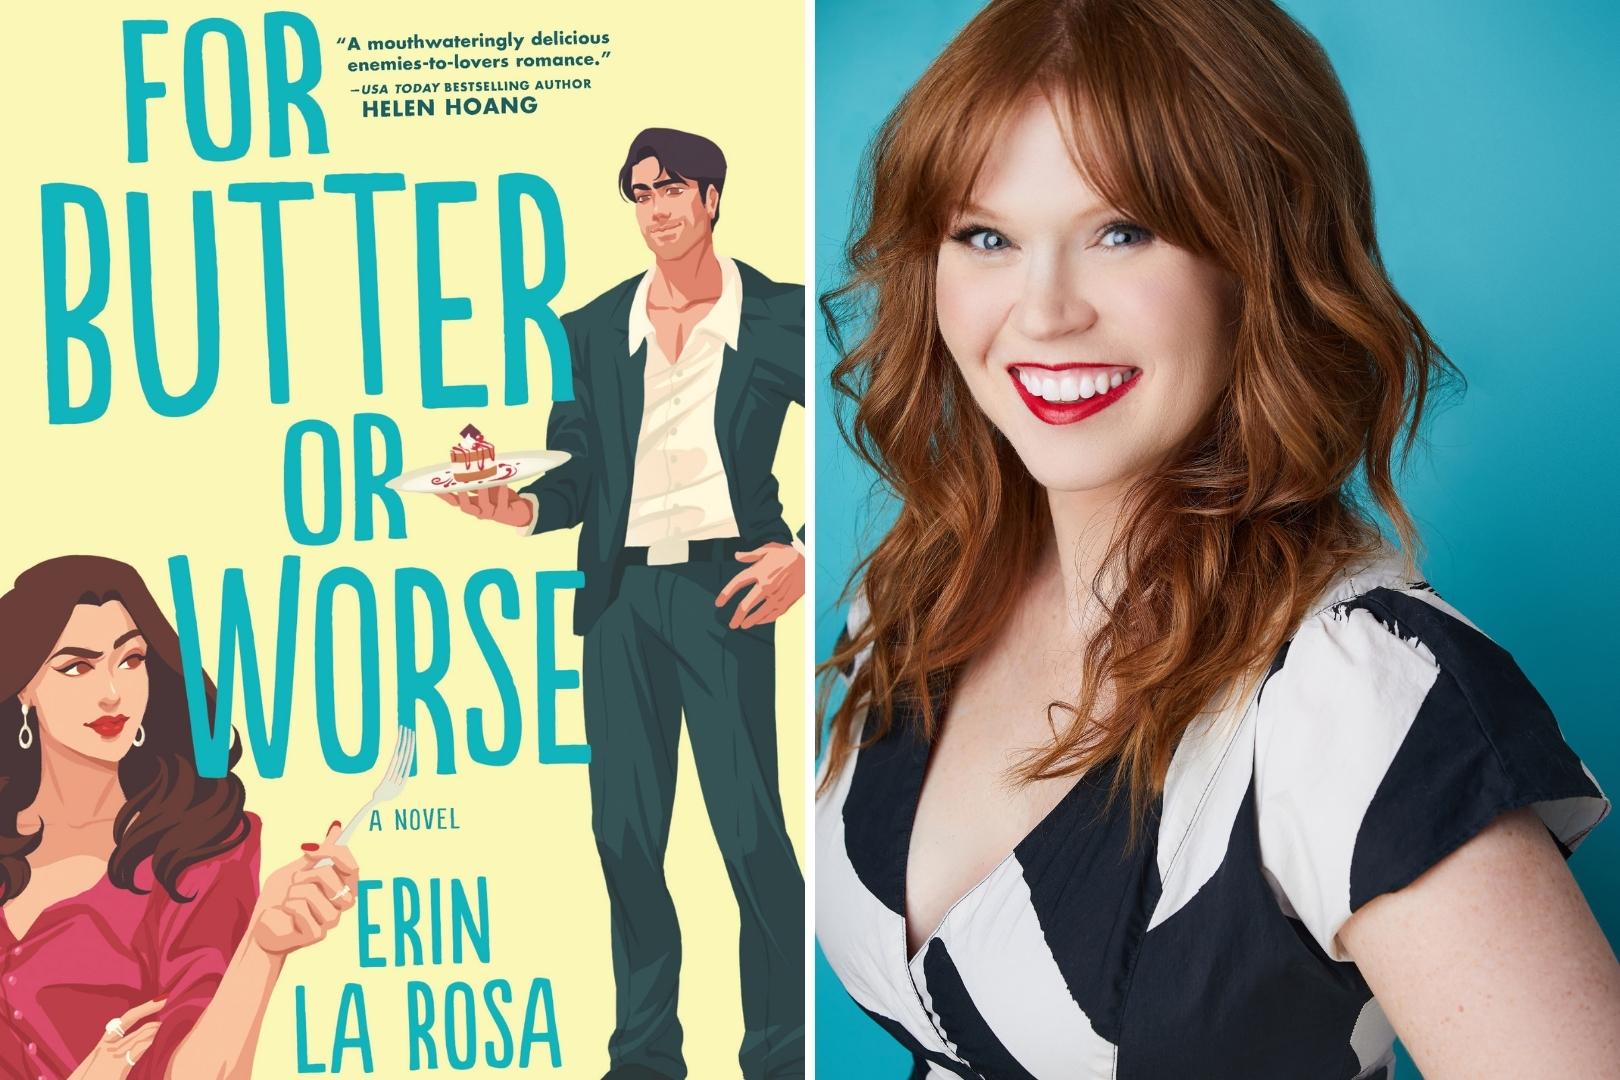 Q&A with Erin La Rosa, Author of For Butter or Worse